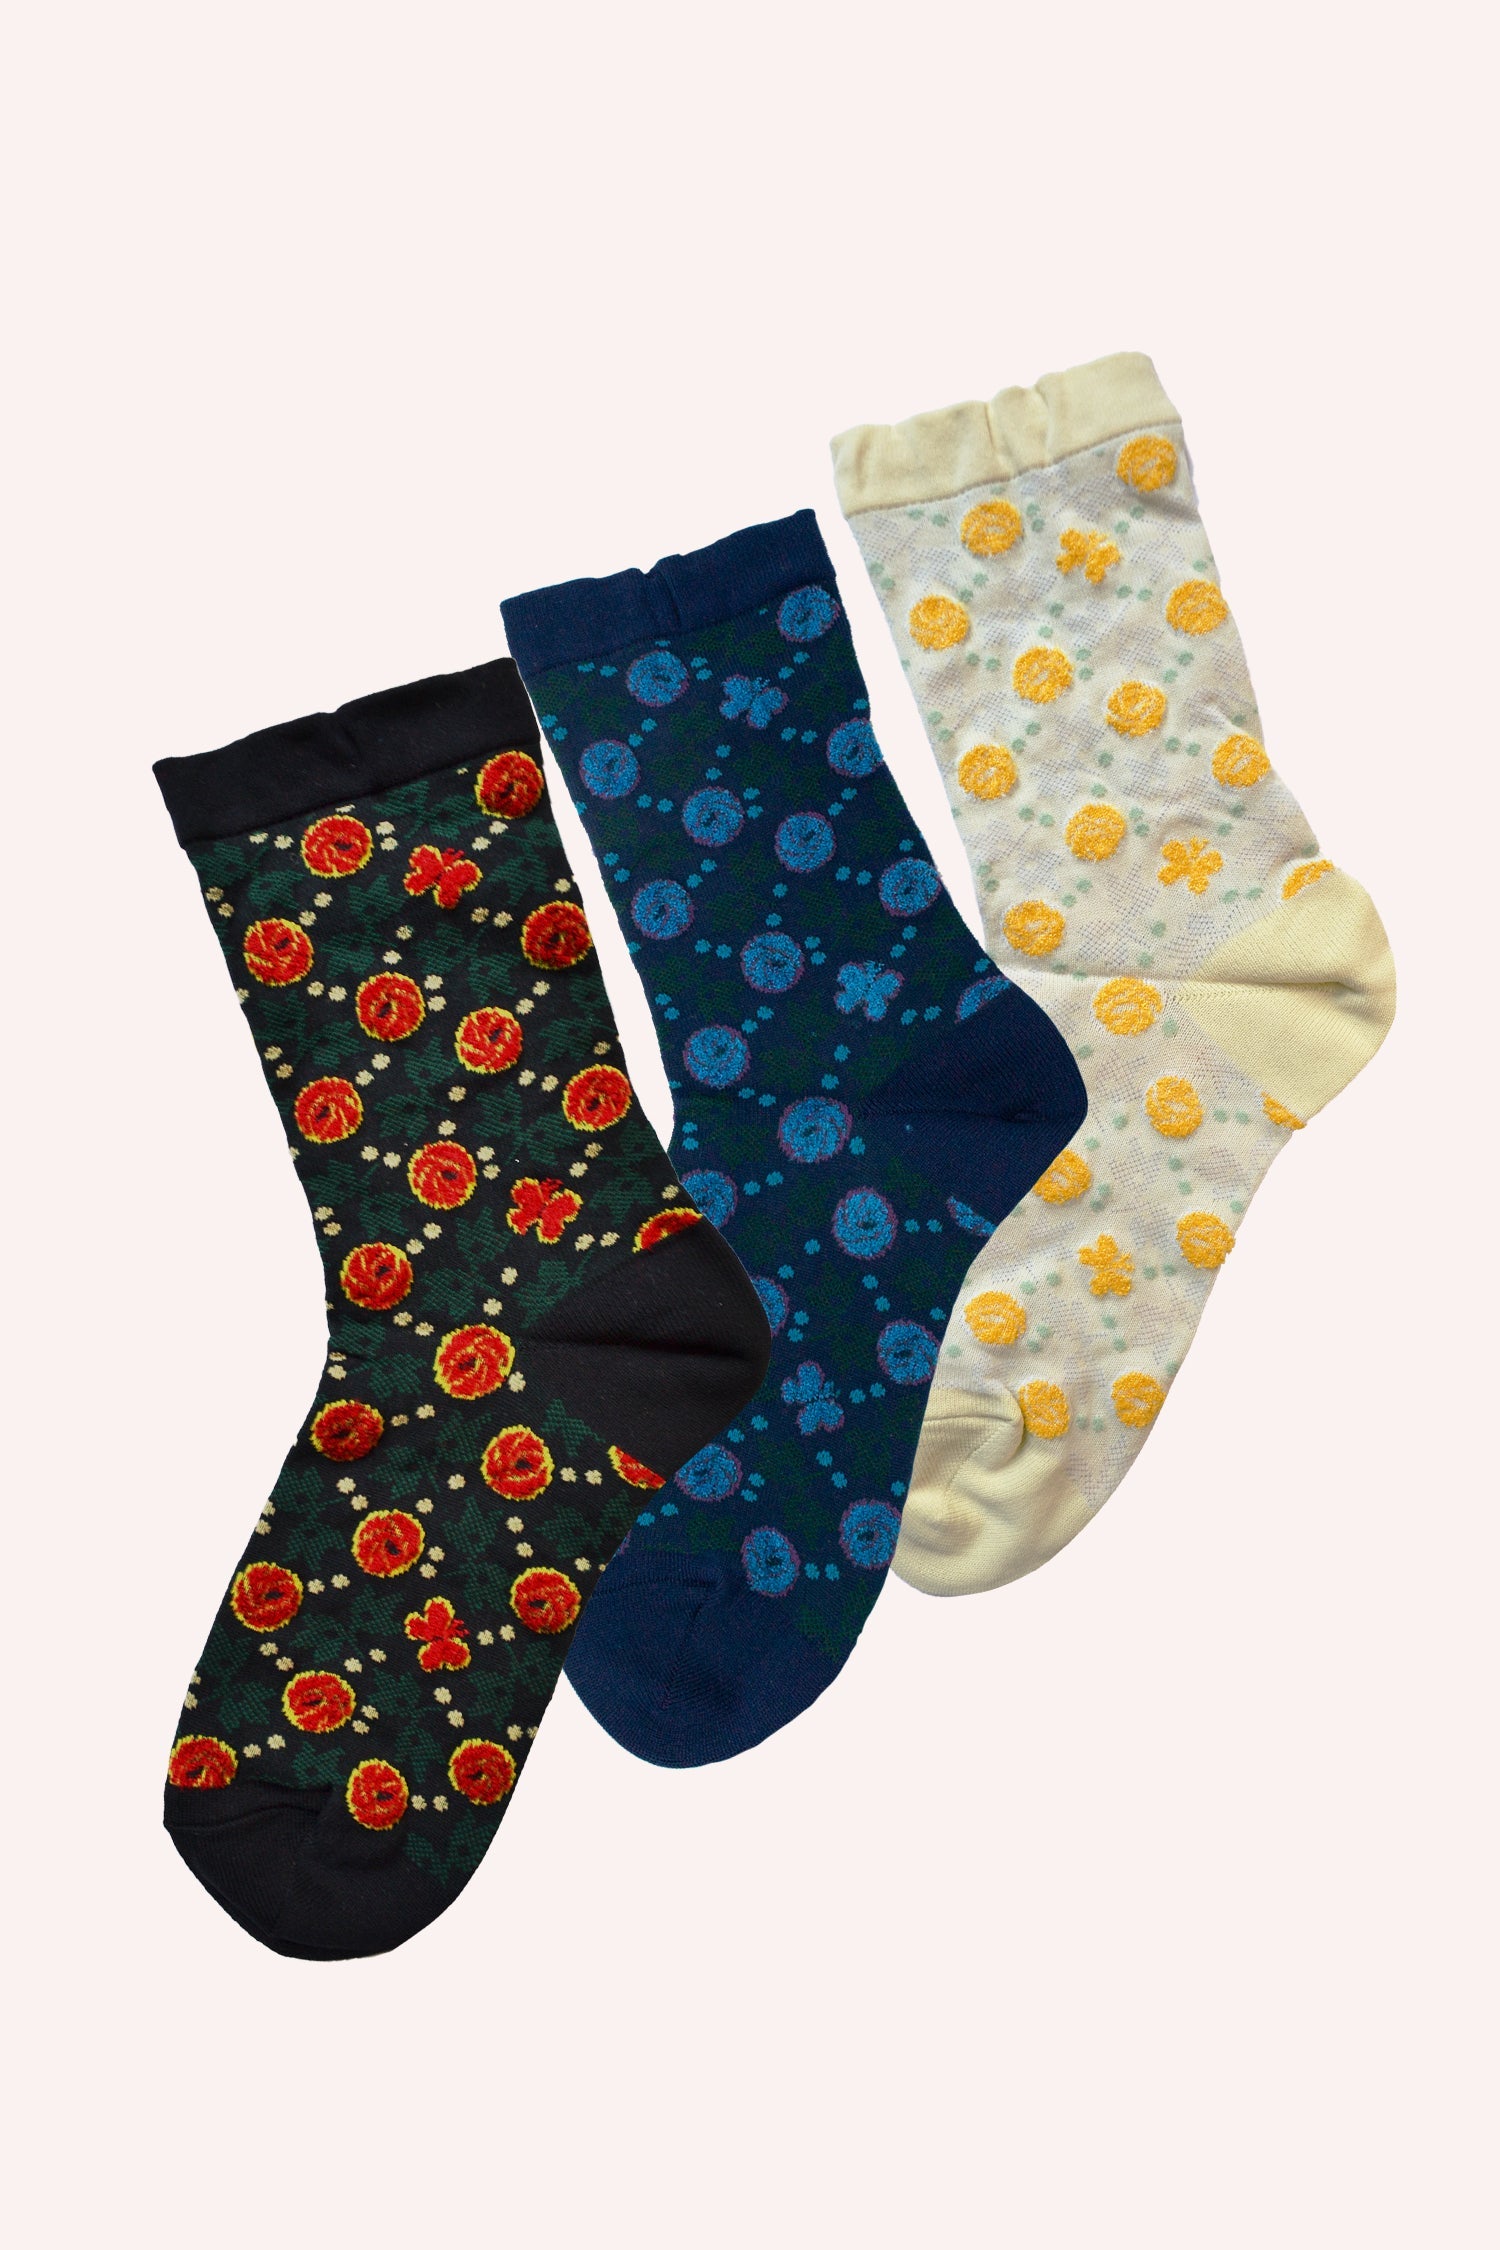 Rosy Dot Sock Bundle, 3-pair of Socks, greenish, blue, light yellow, just above the ankles  